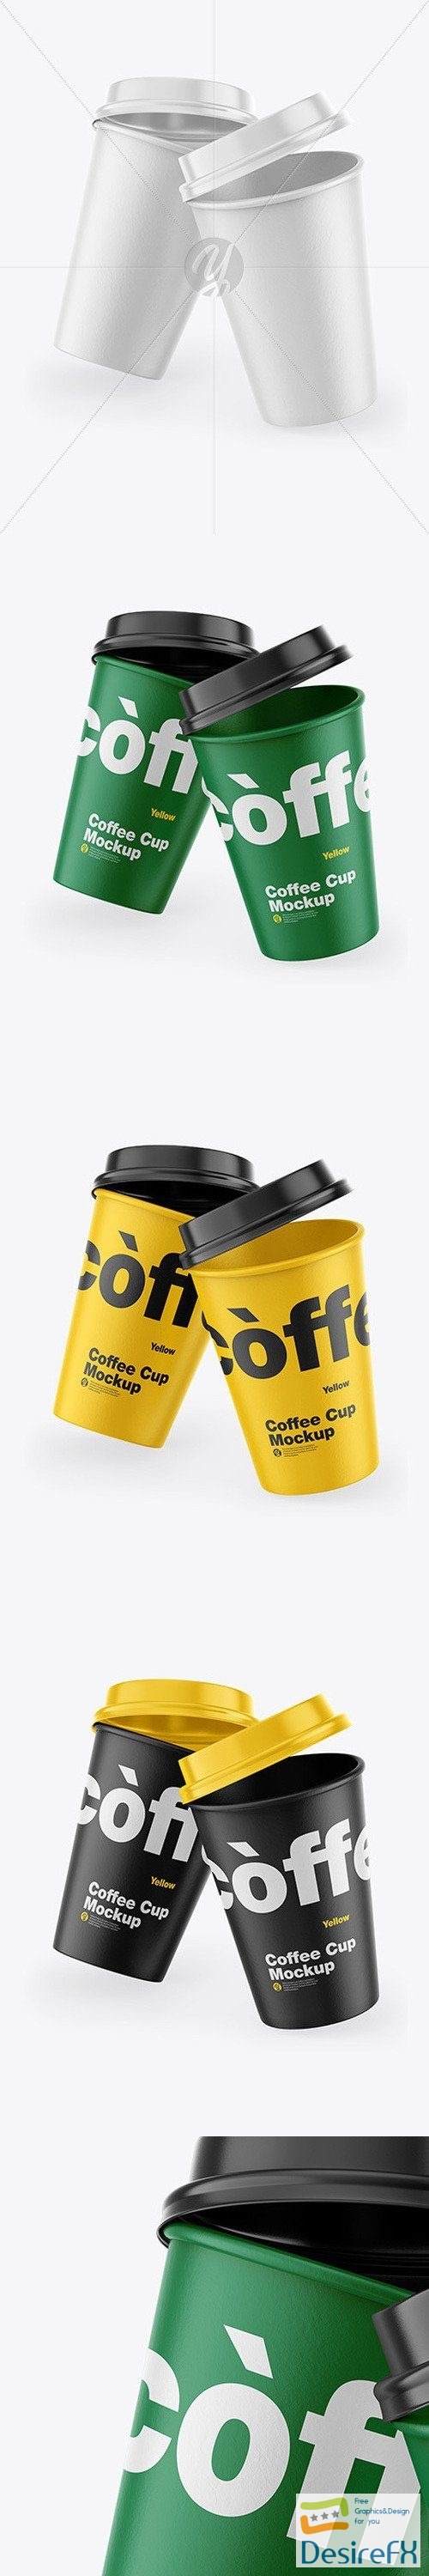 Paper Coffee Cup Mockup 54613